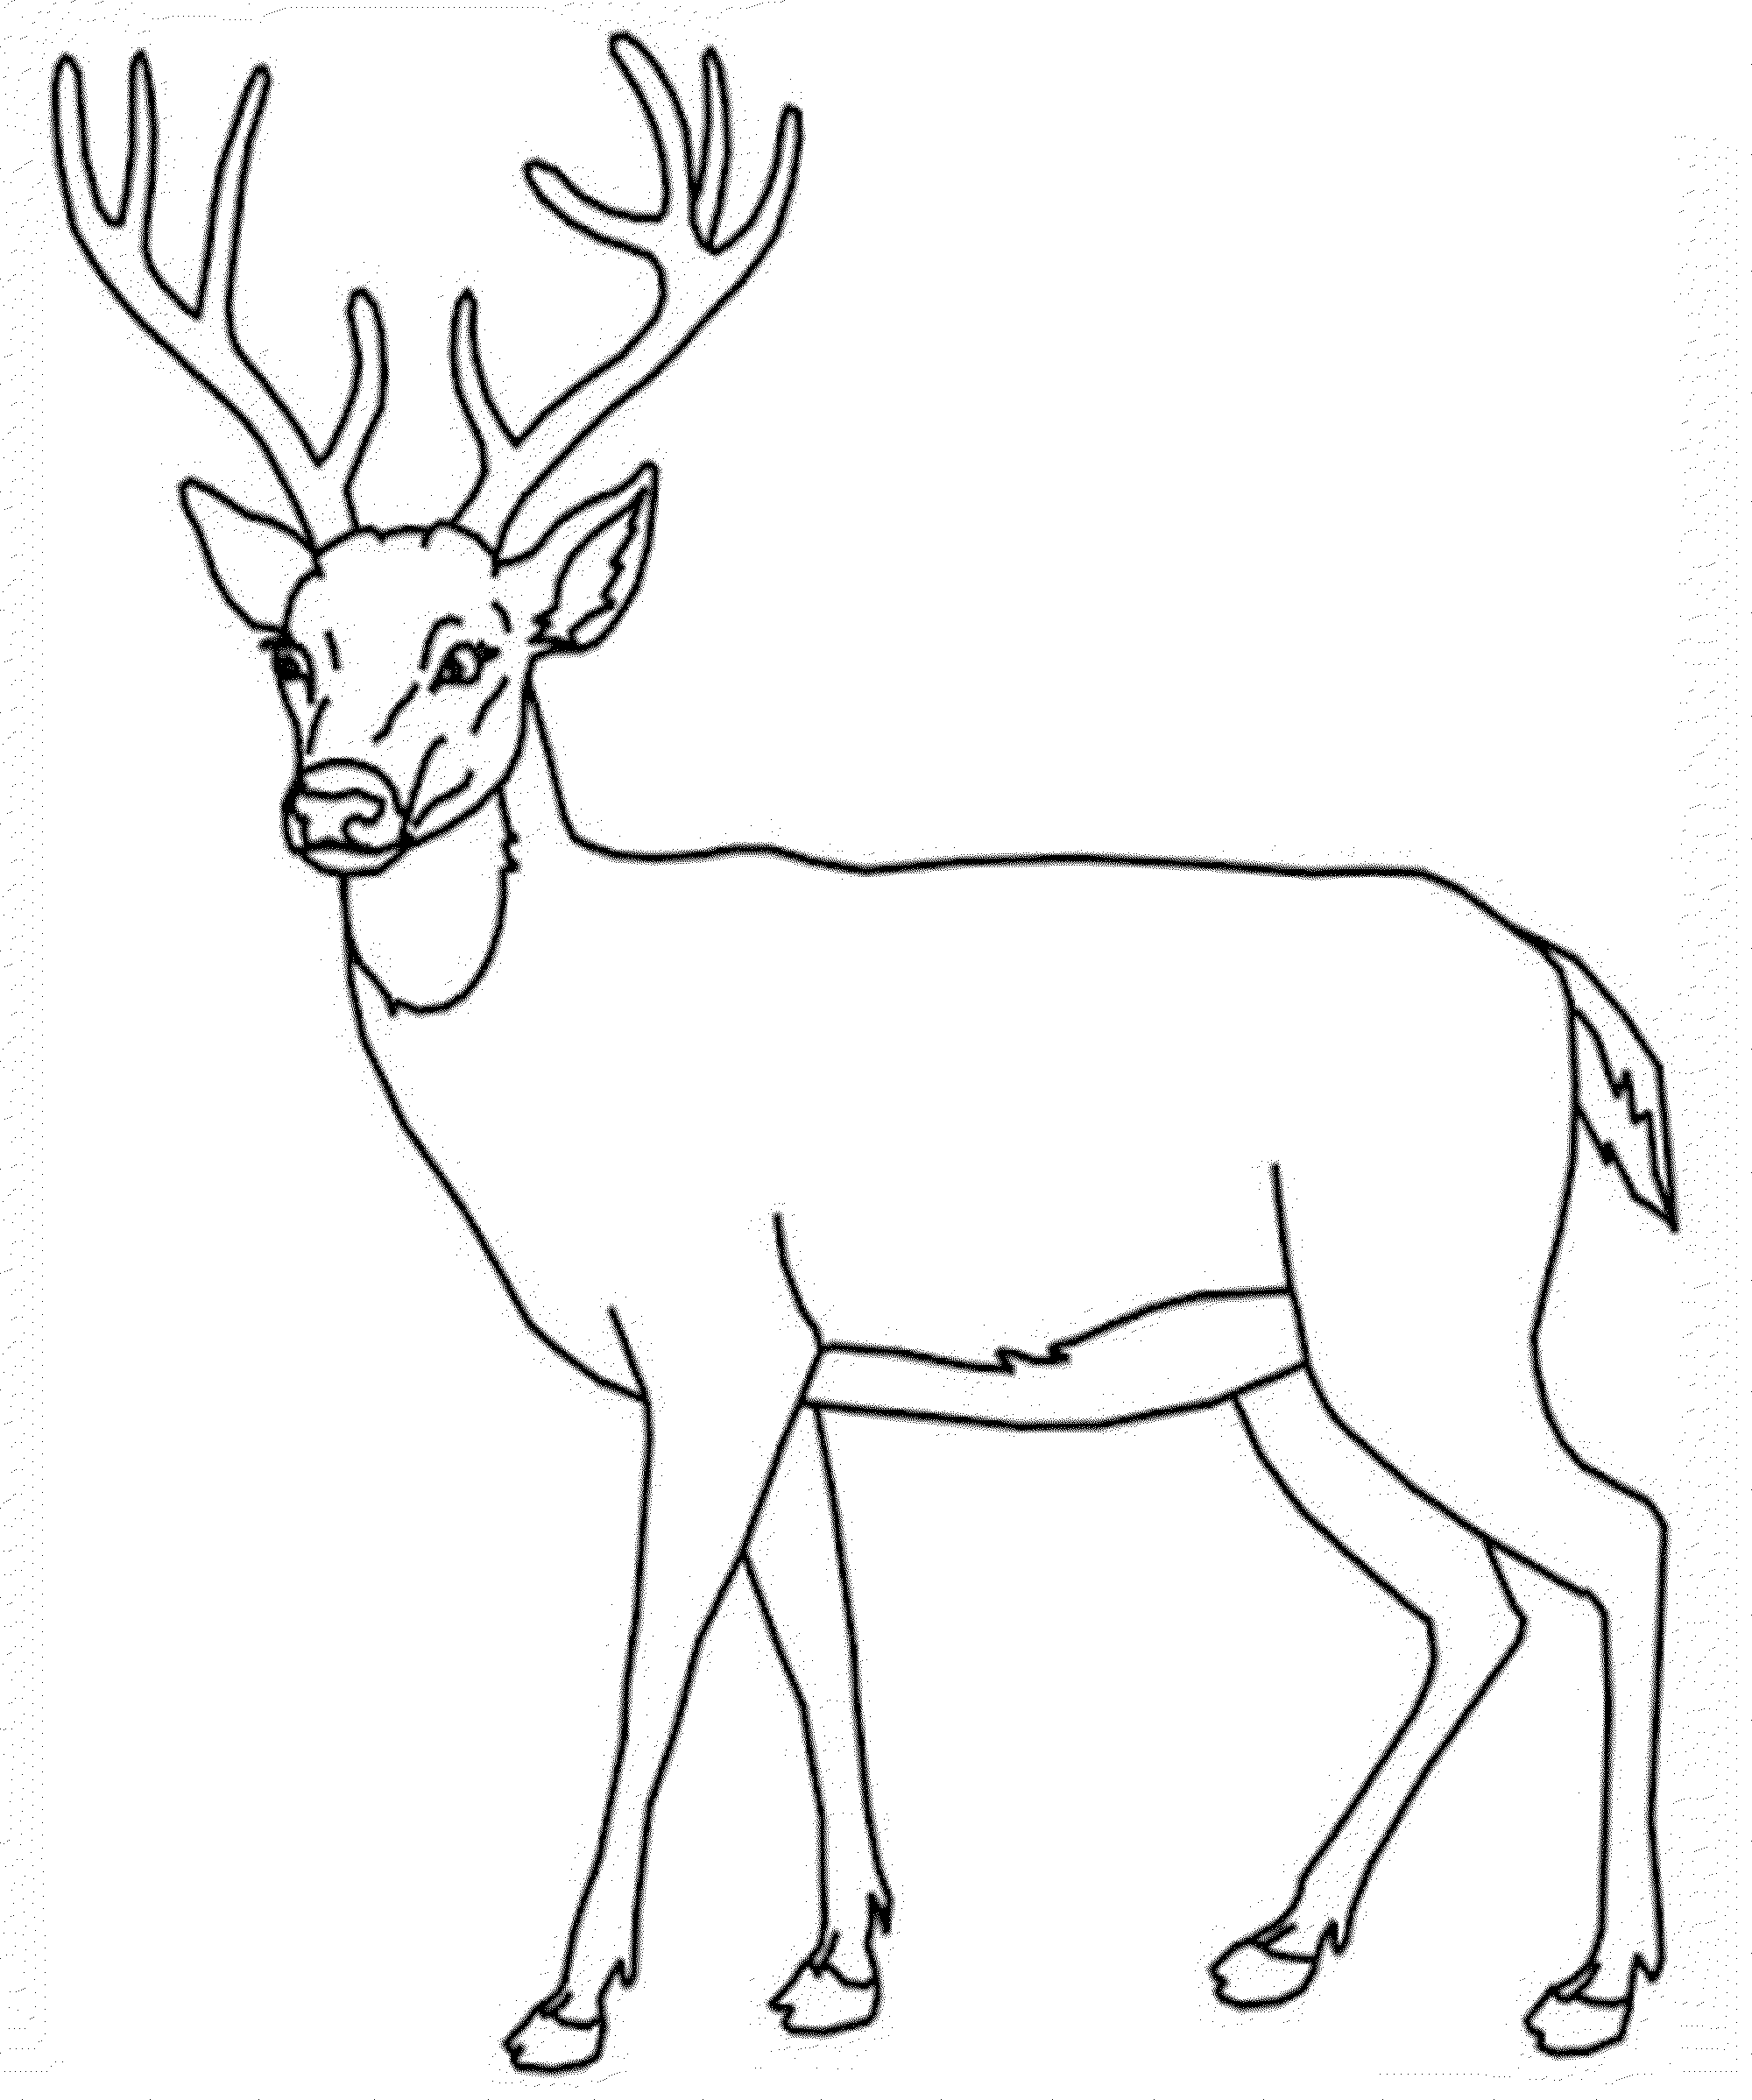 Print & Download Deer Coloring Pages for Totally Enjoyable Leisure